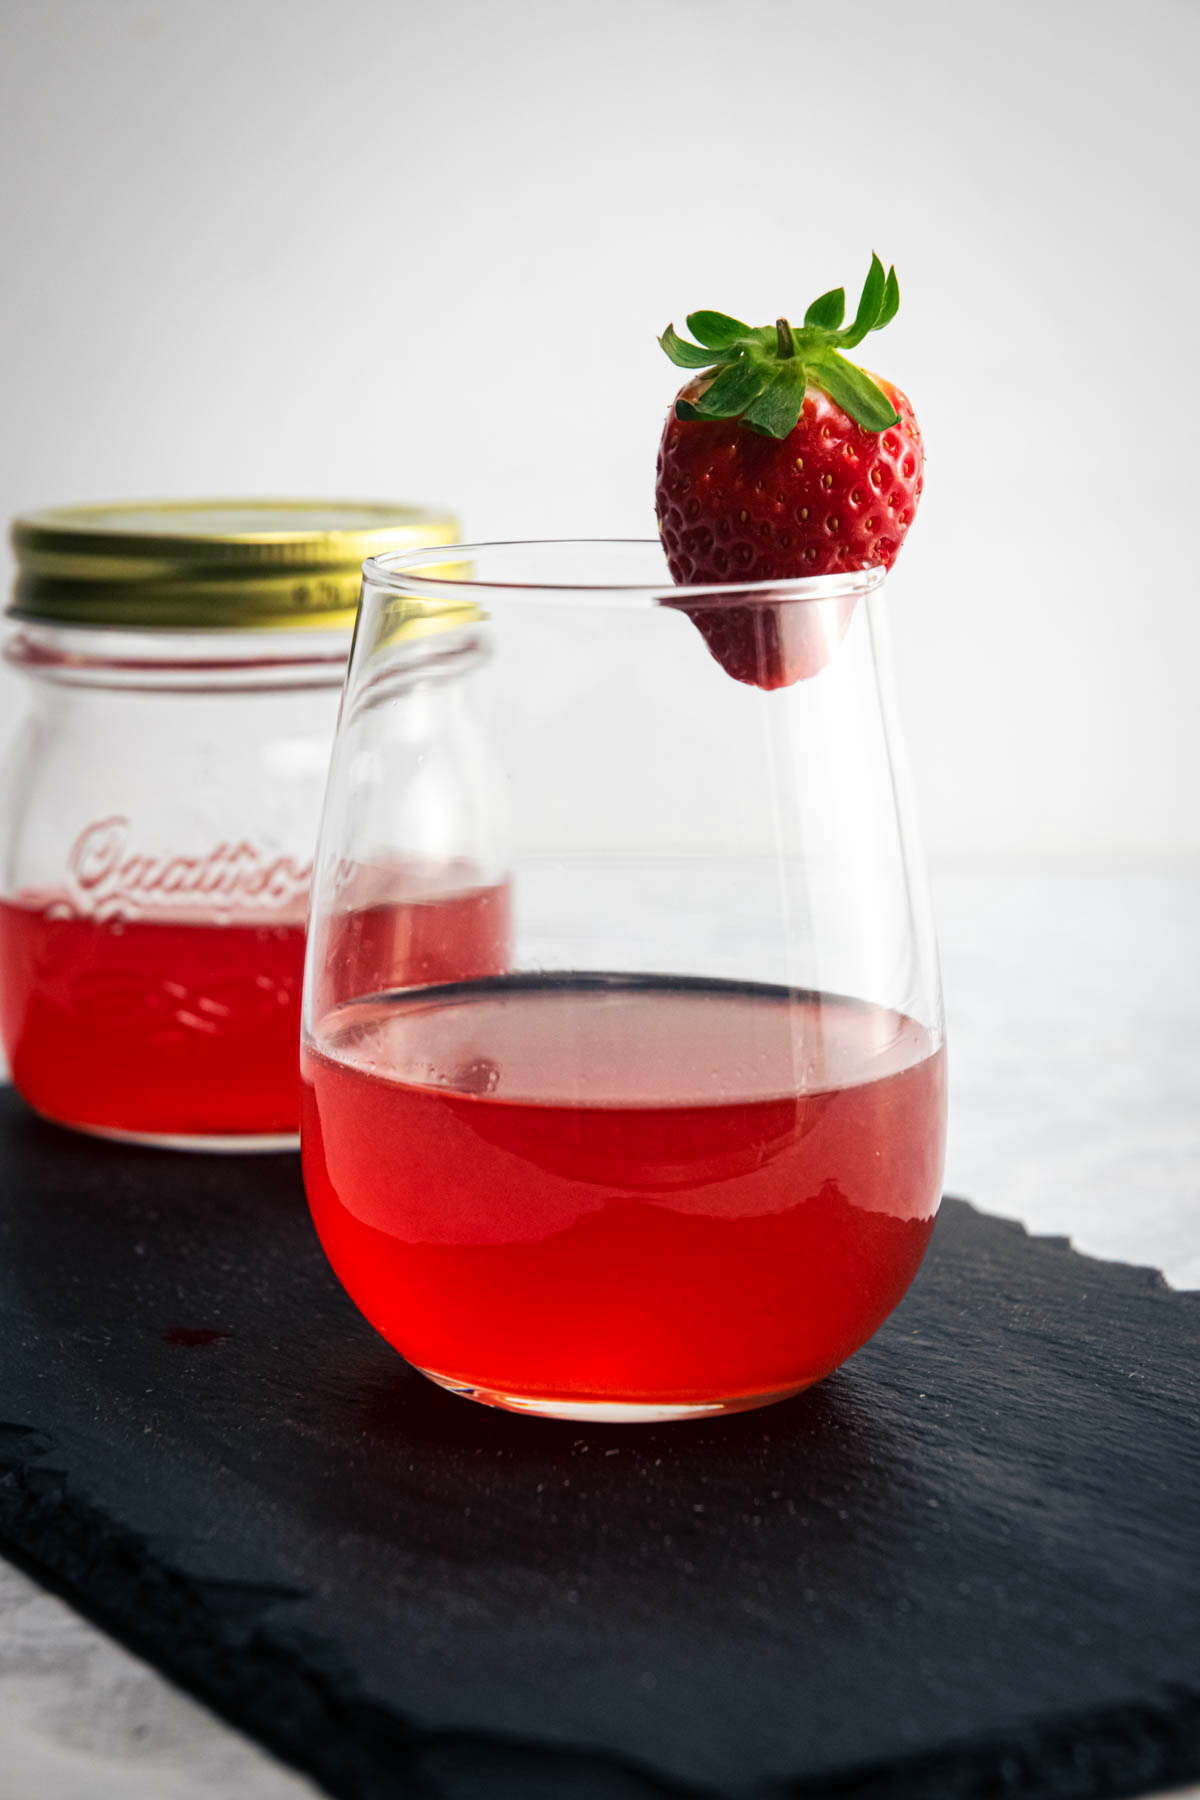 Strawberry liqueur in a jar and wine glass, fresh strawberry on the side.